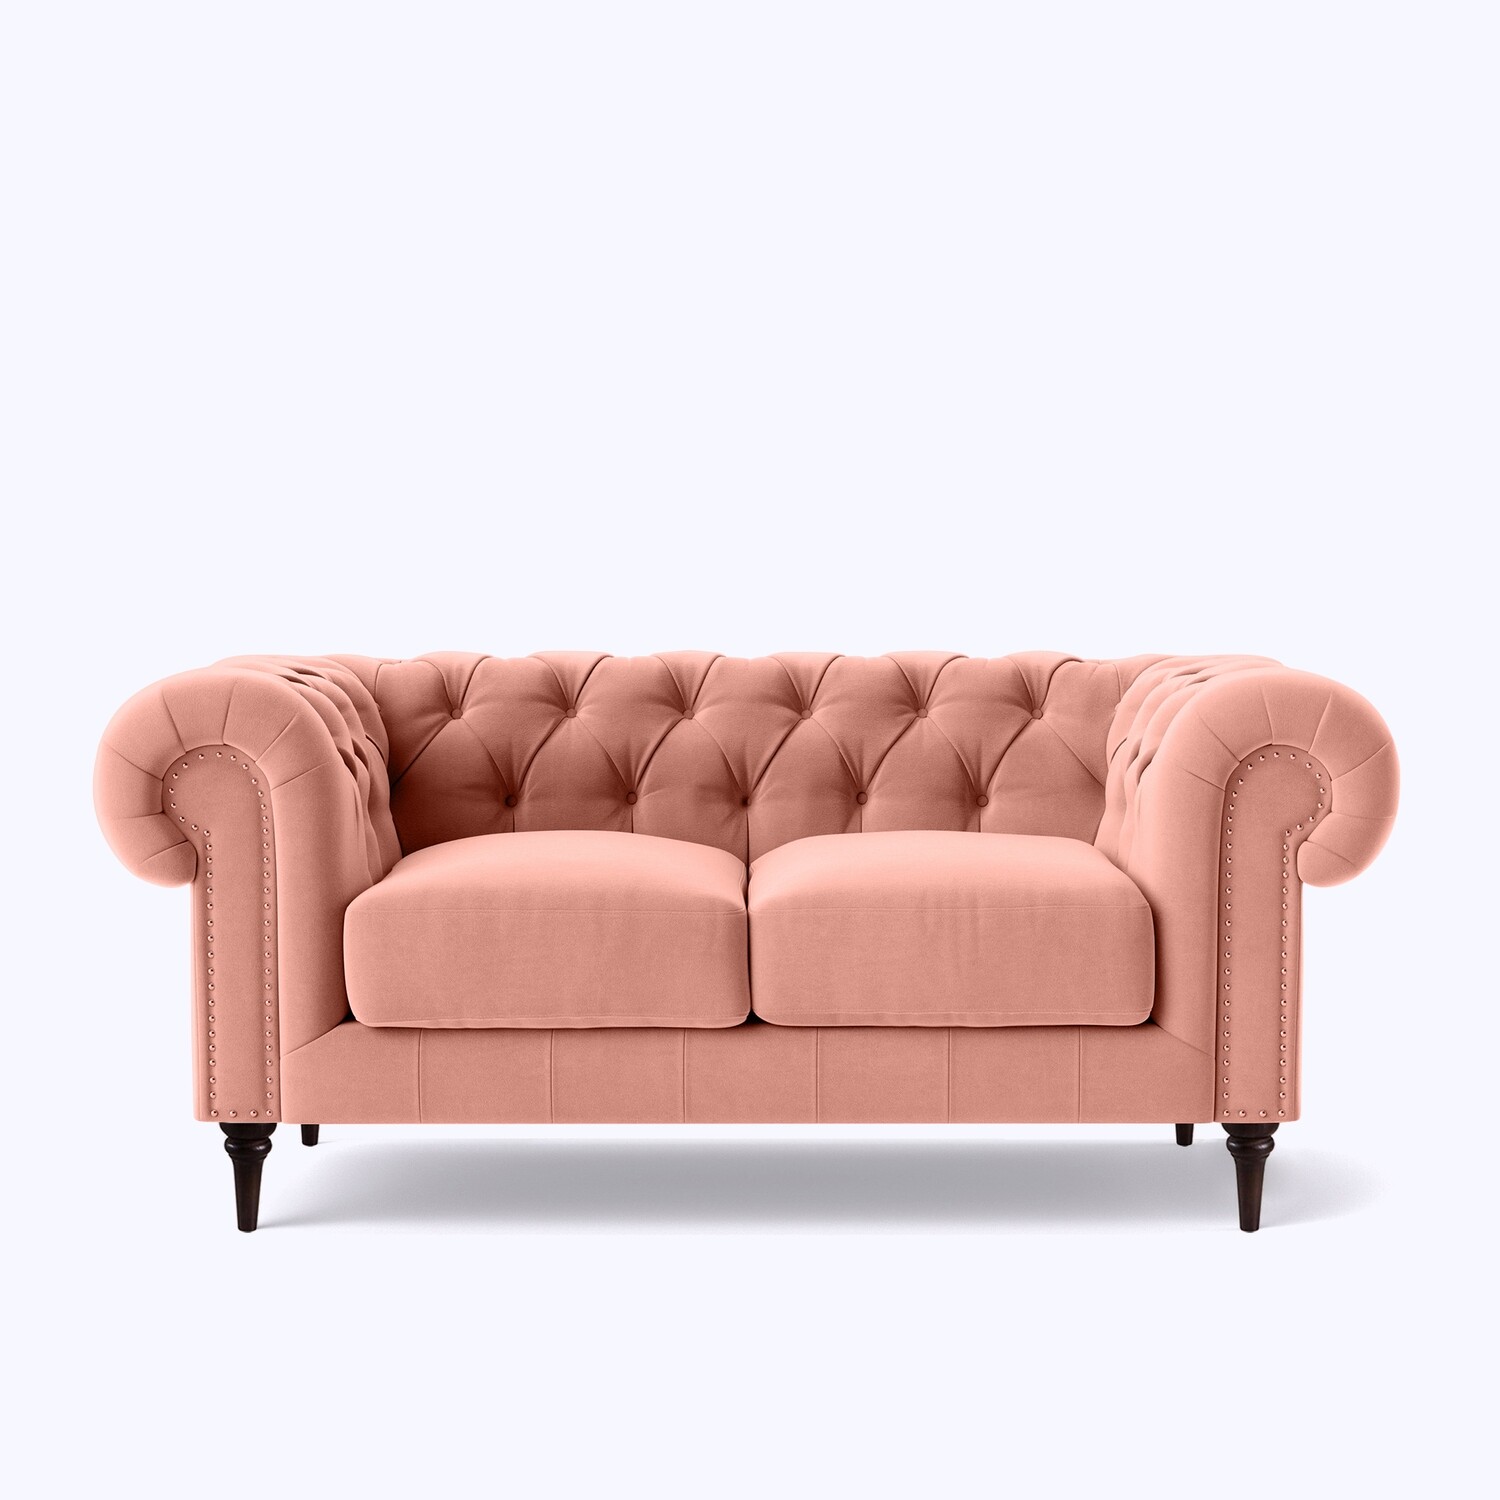 Chesterfield 2 Seater Sofa - 71"